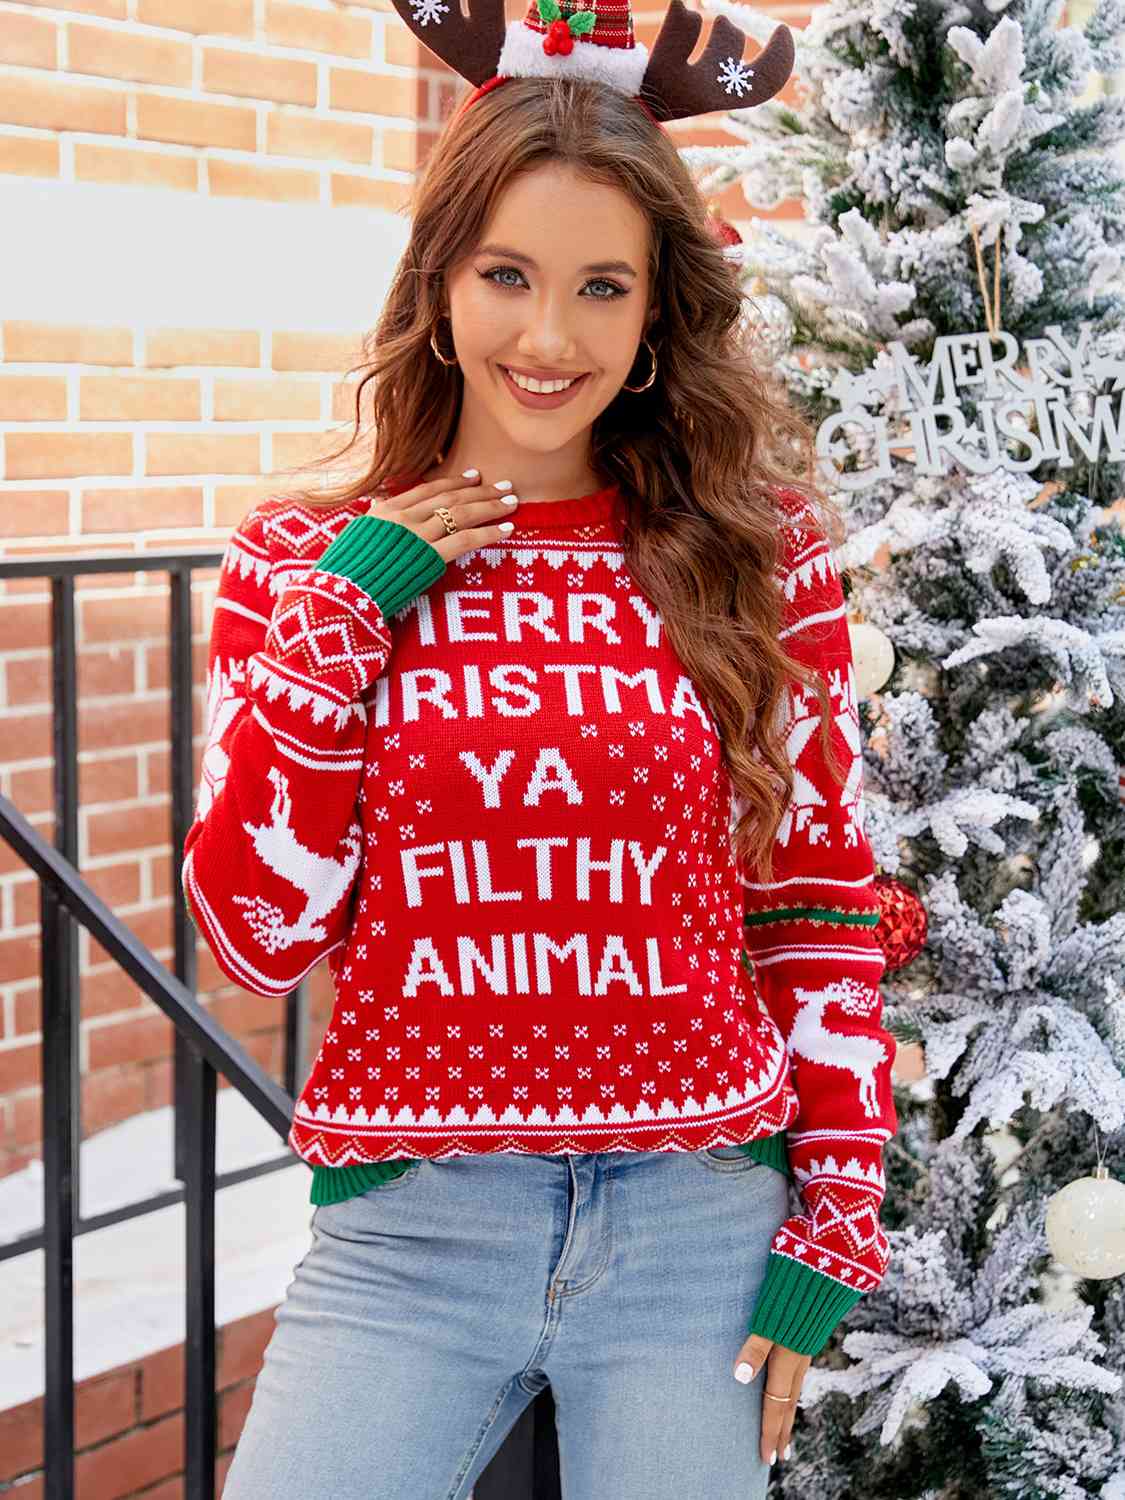 Merry Christmas Ya Filthy Animal Funny Home Retro Movie Knit Sweater